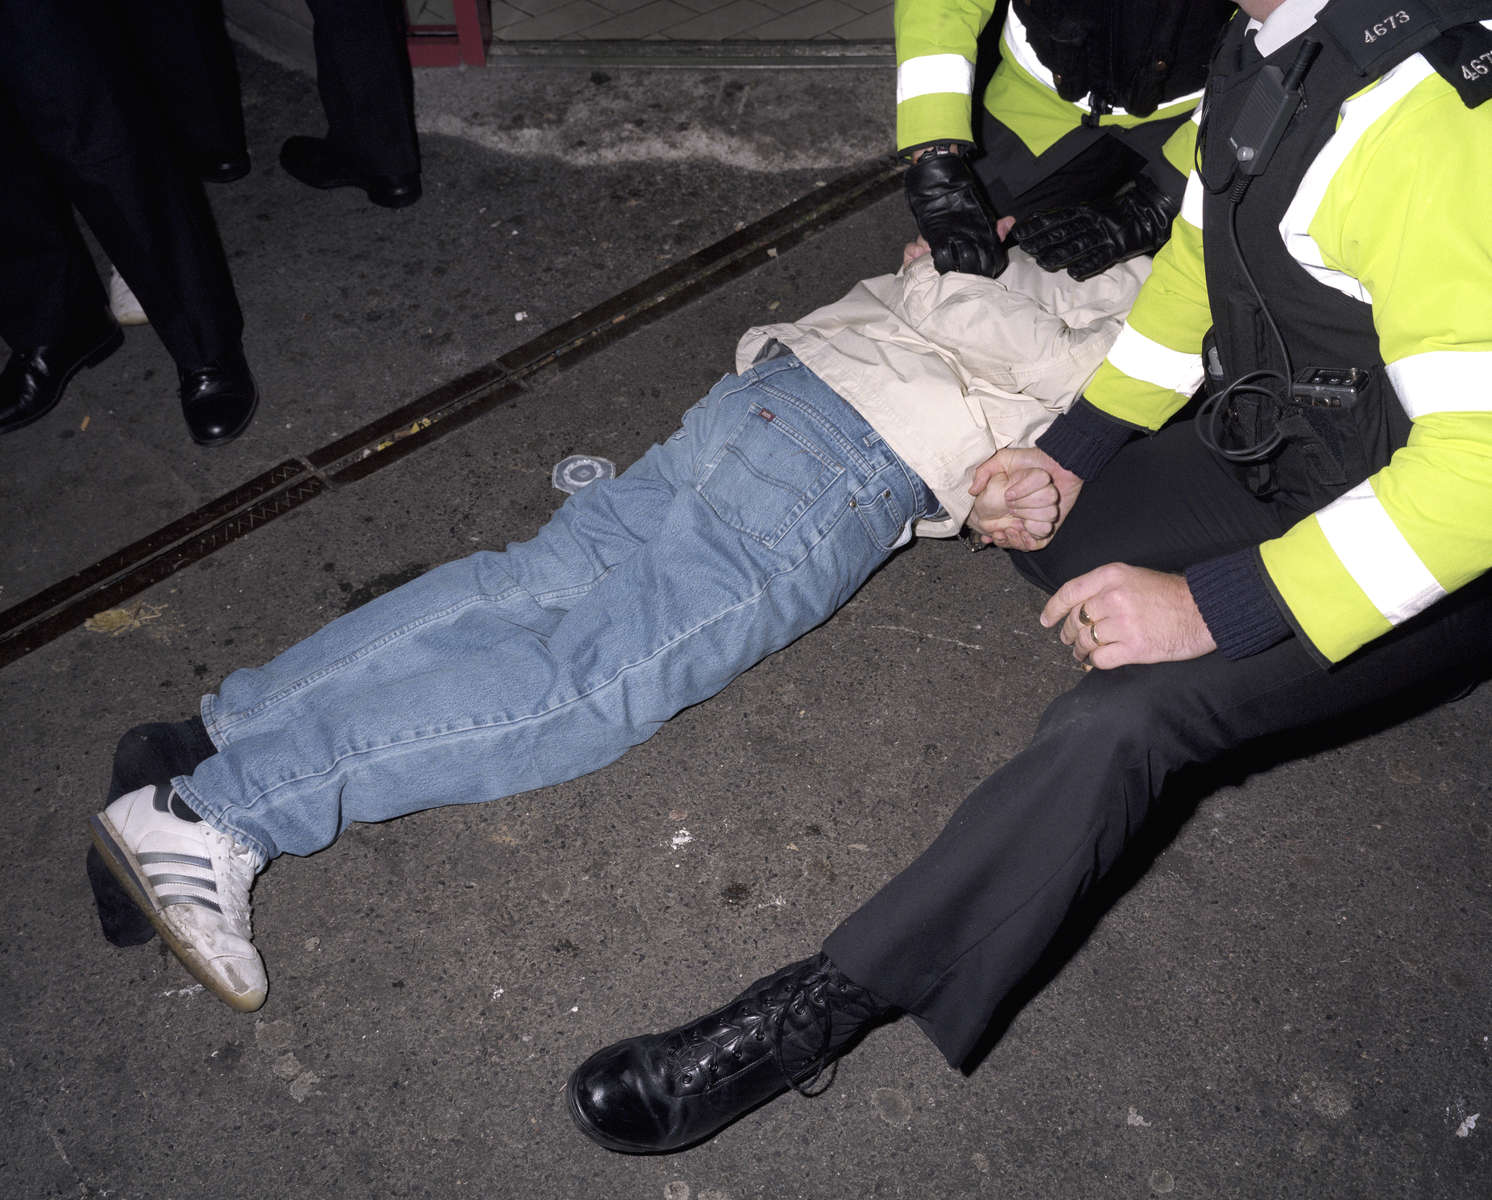 A young man is restrained by police officers after they intervene to break up a fight outside a kebab shop on Union Street in Plymouth. November 2001